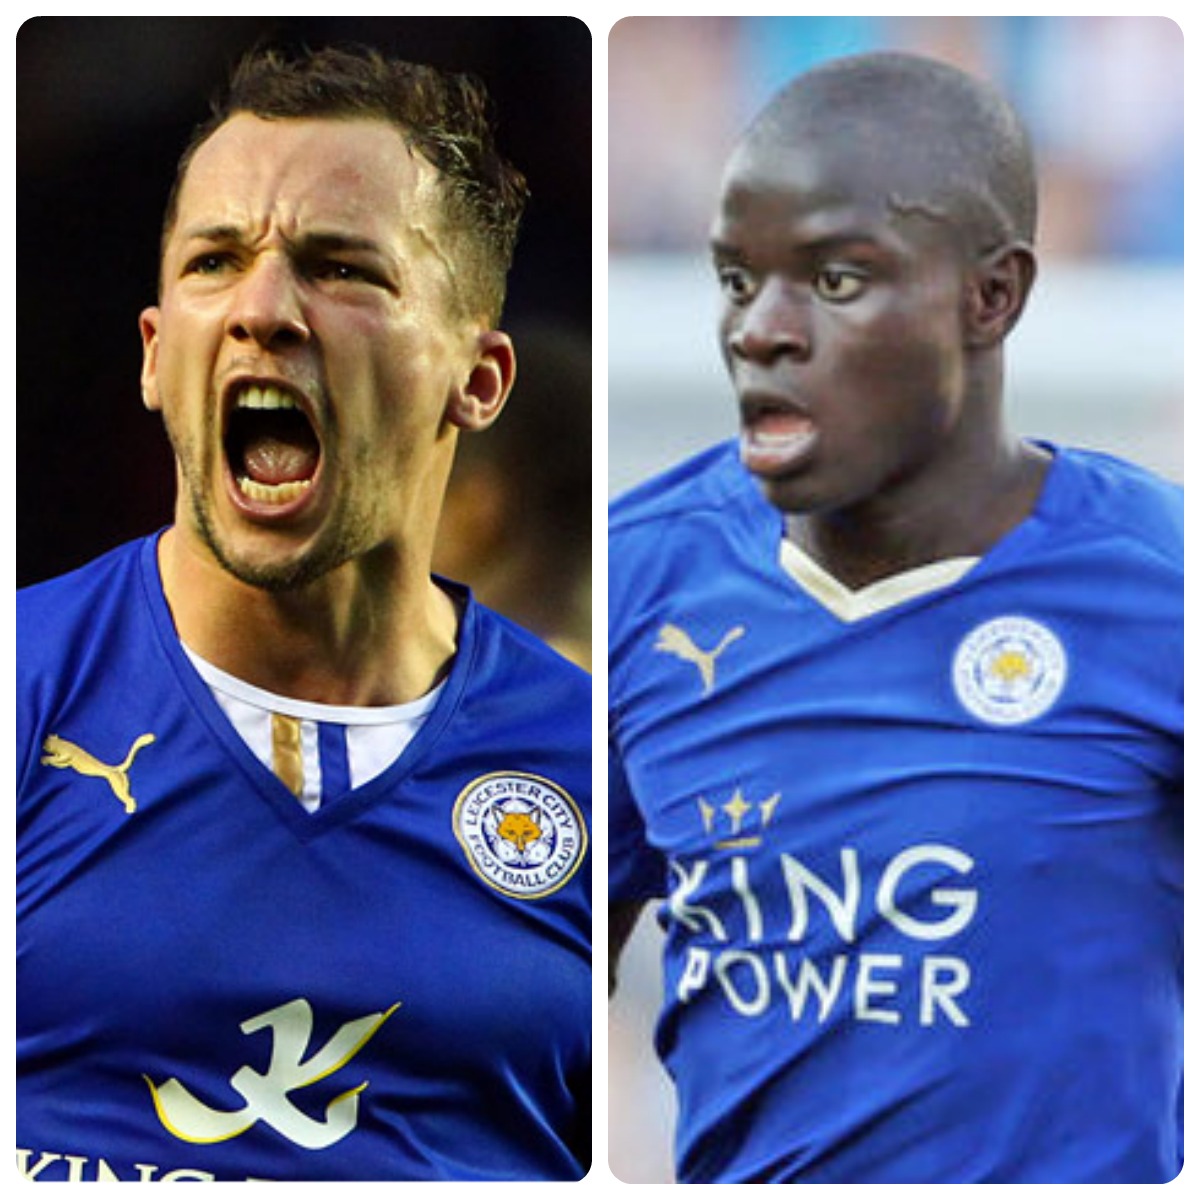 Leicester's dynamic duo: Drinkwater and Kante Image source: Express.co.uk & c.smimg.net